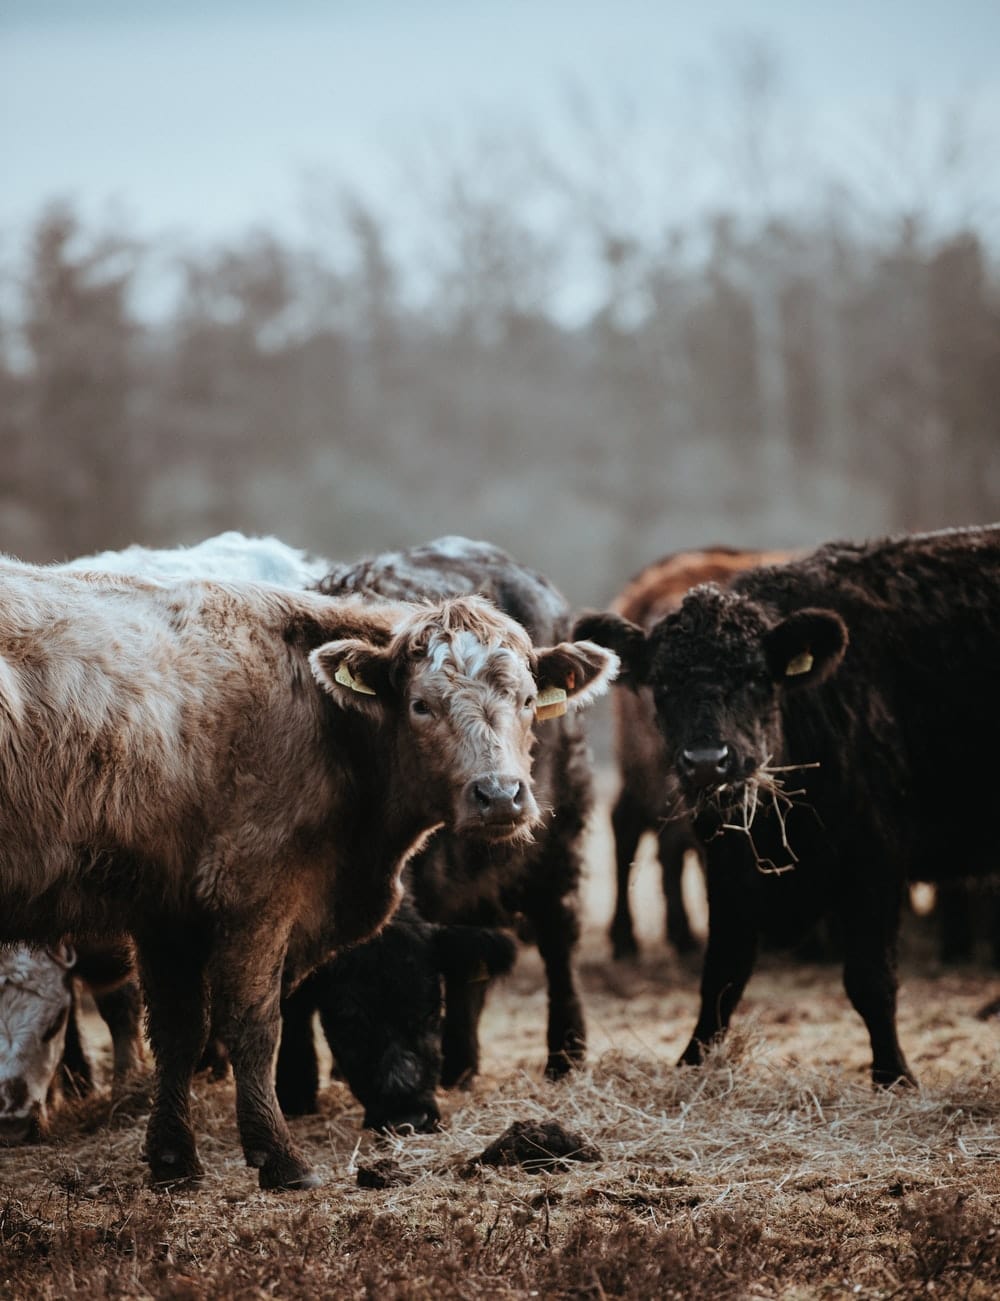 Cross Stitch | Bison - Selective Focus Of Brown And Black Cattles On Ground At Daytime - Cross Stitched